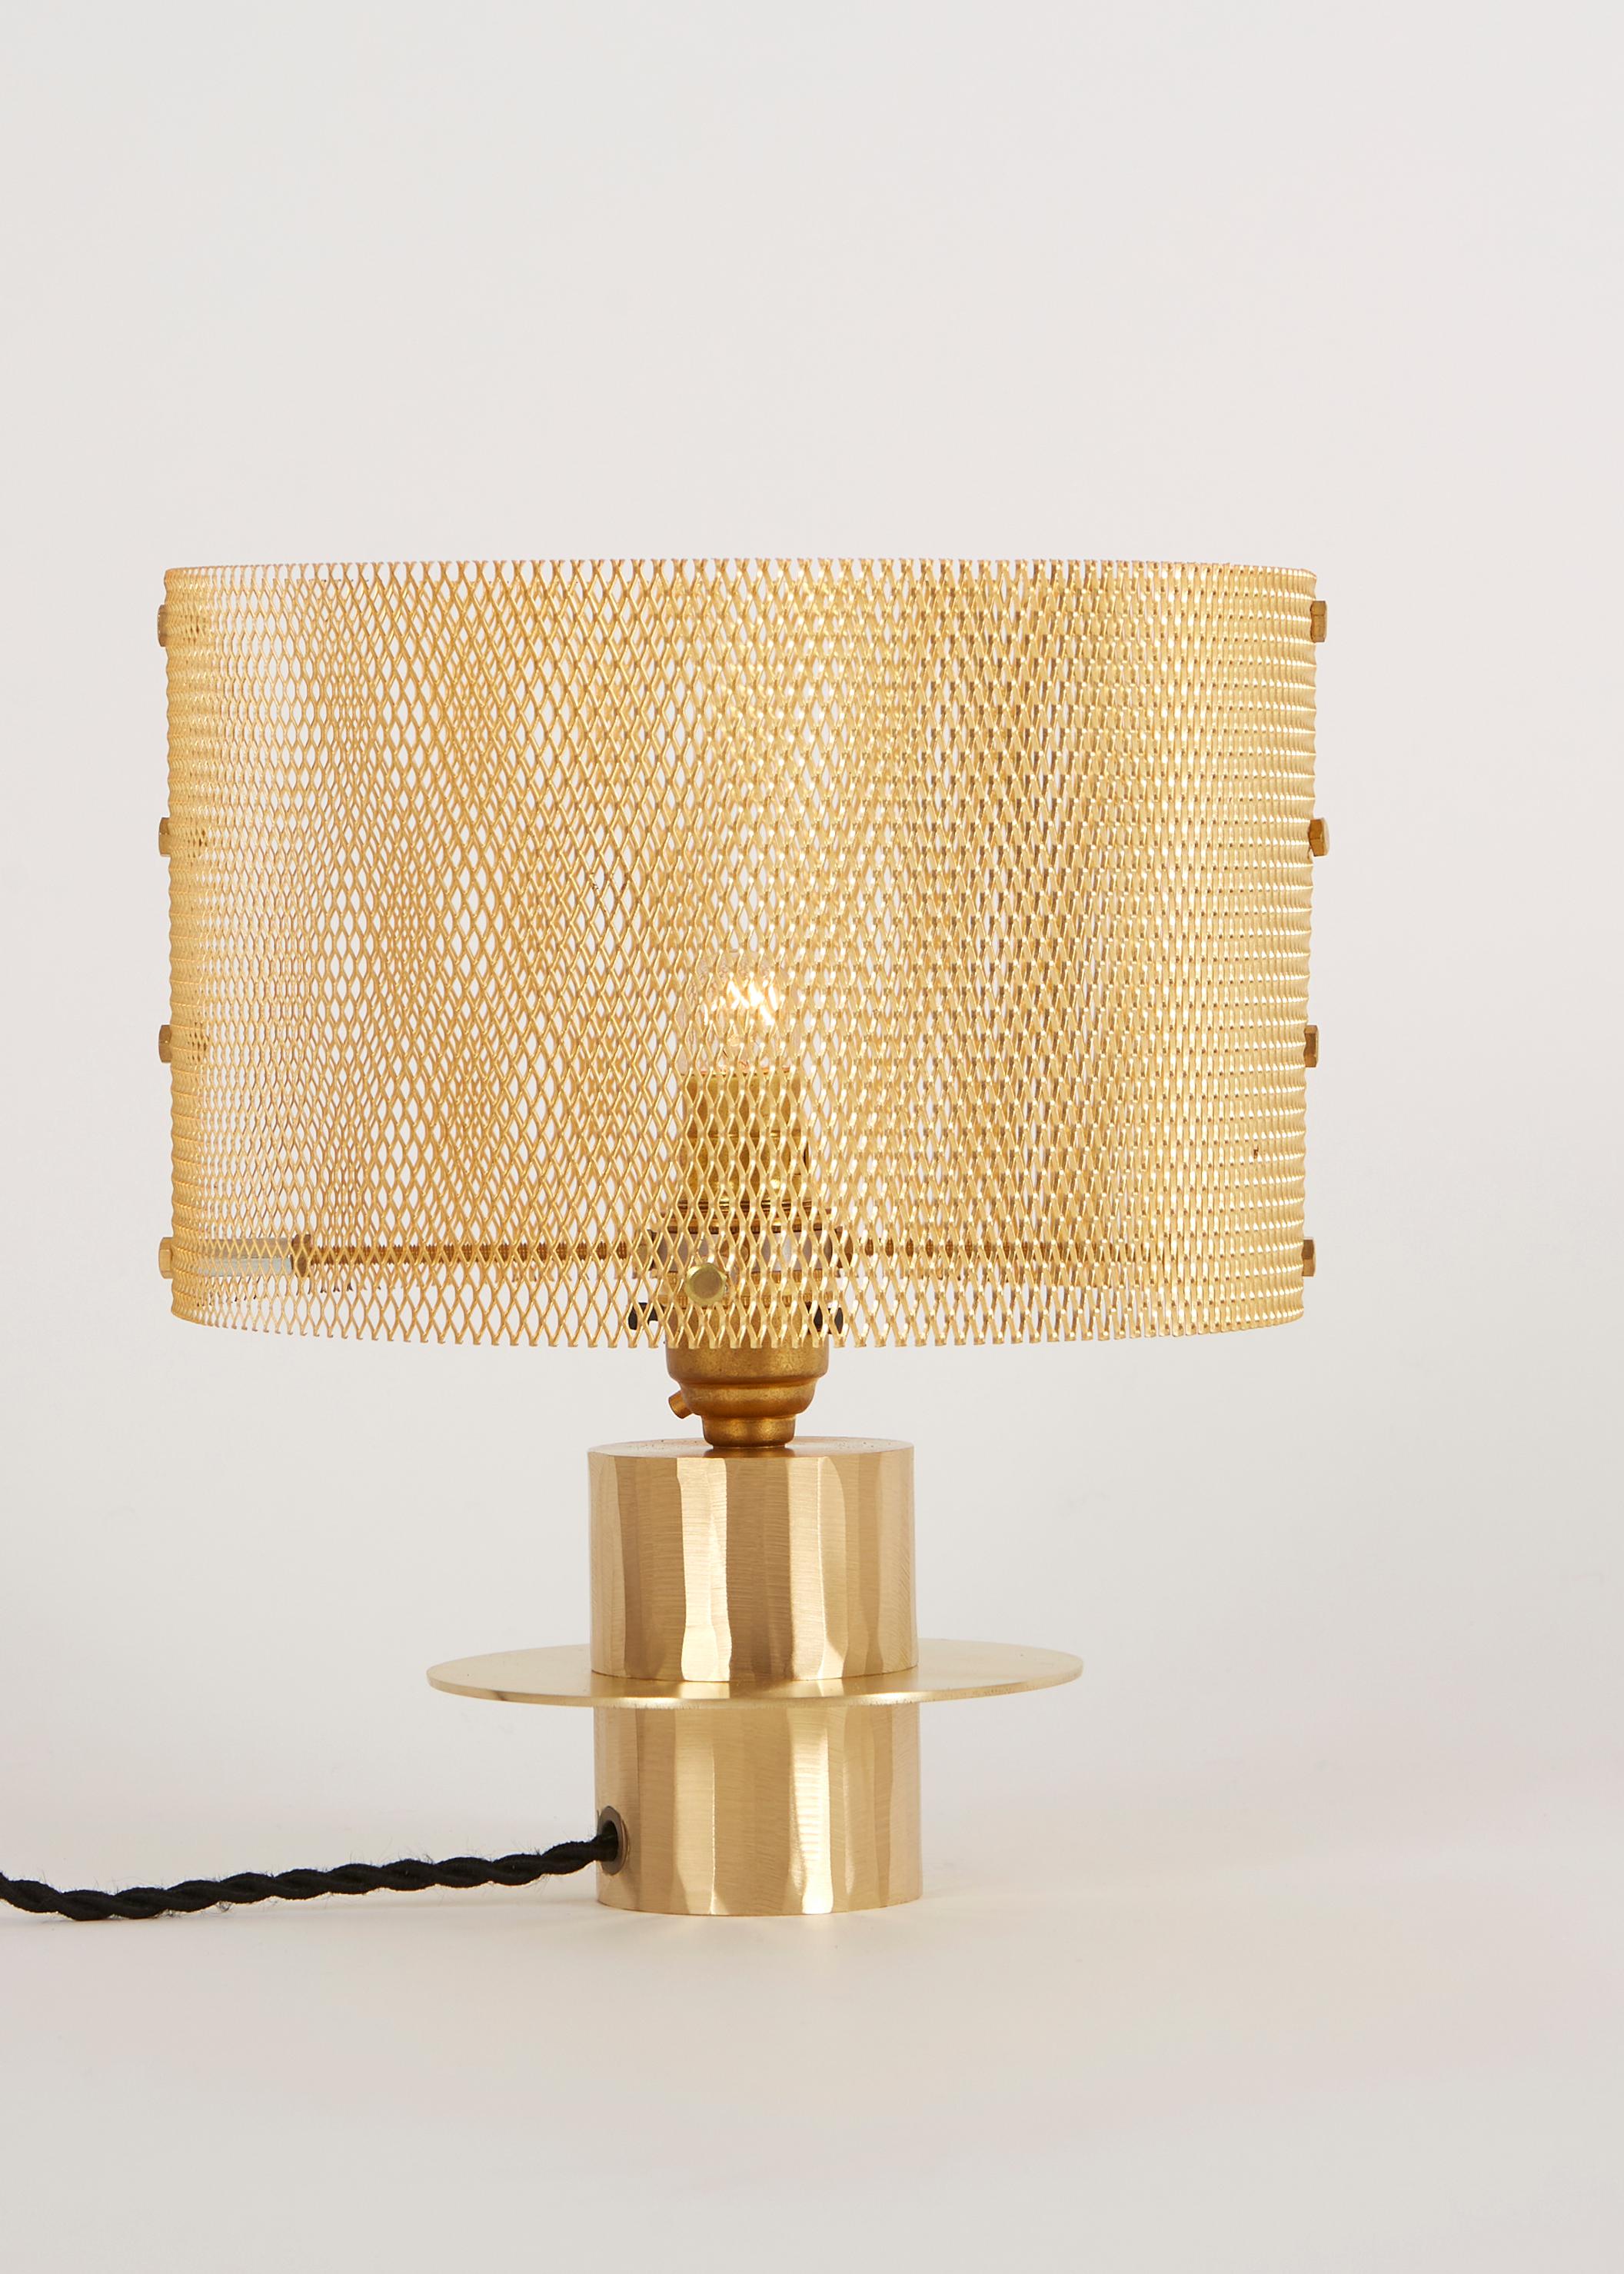 hammered gold lamp